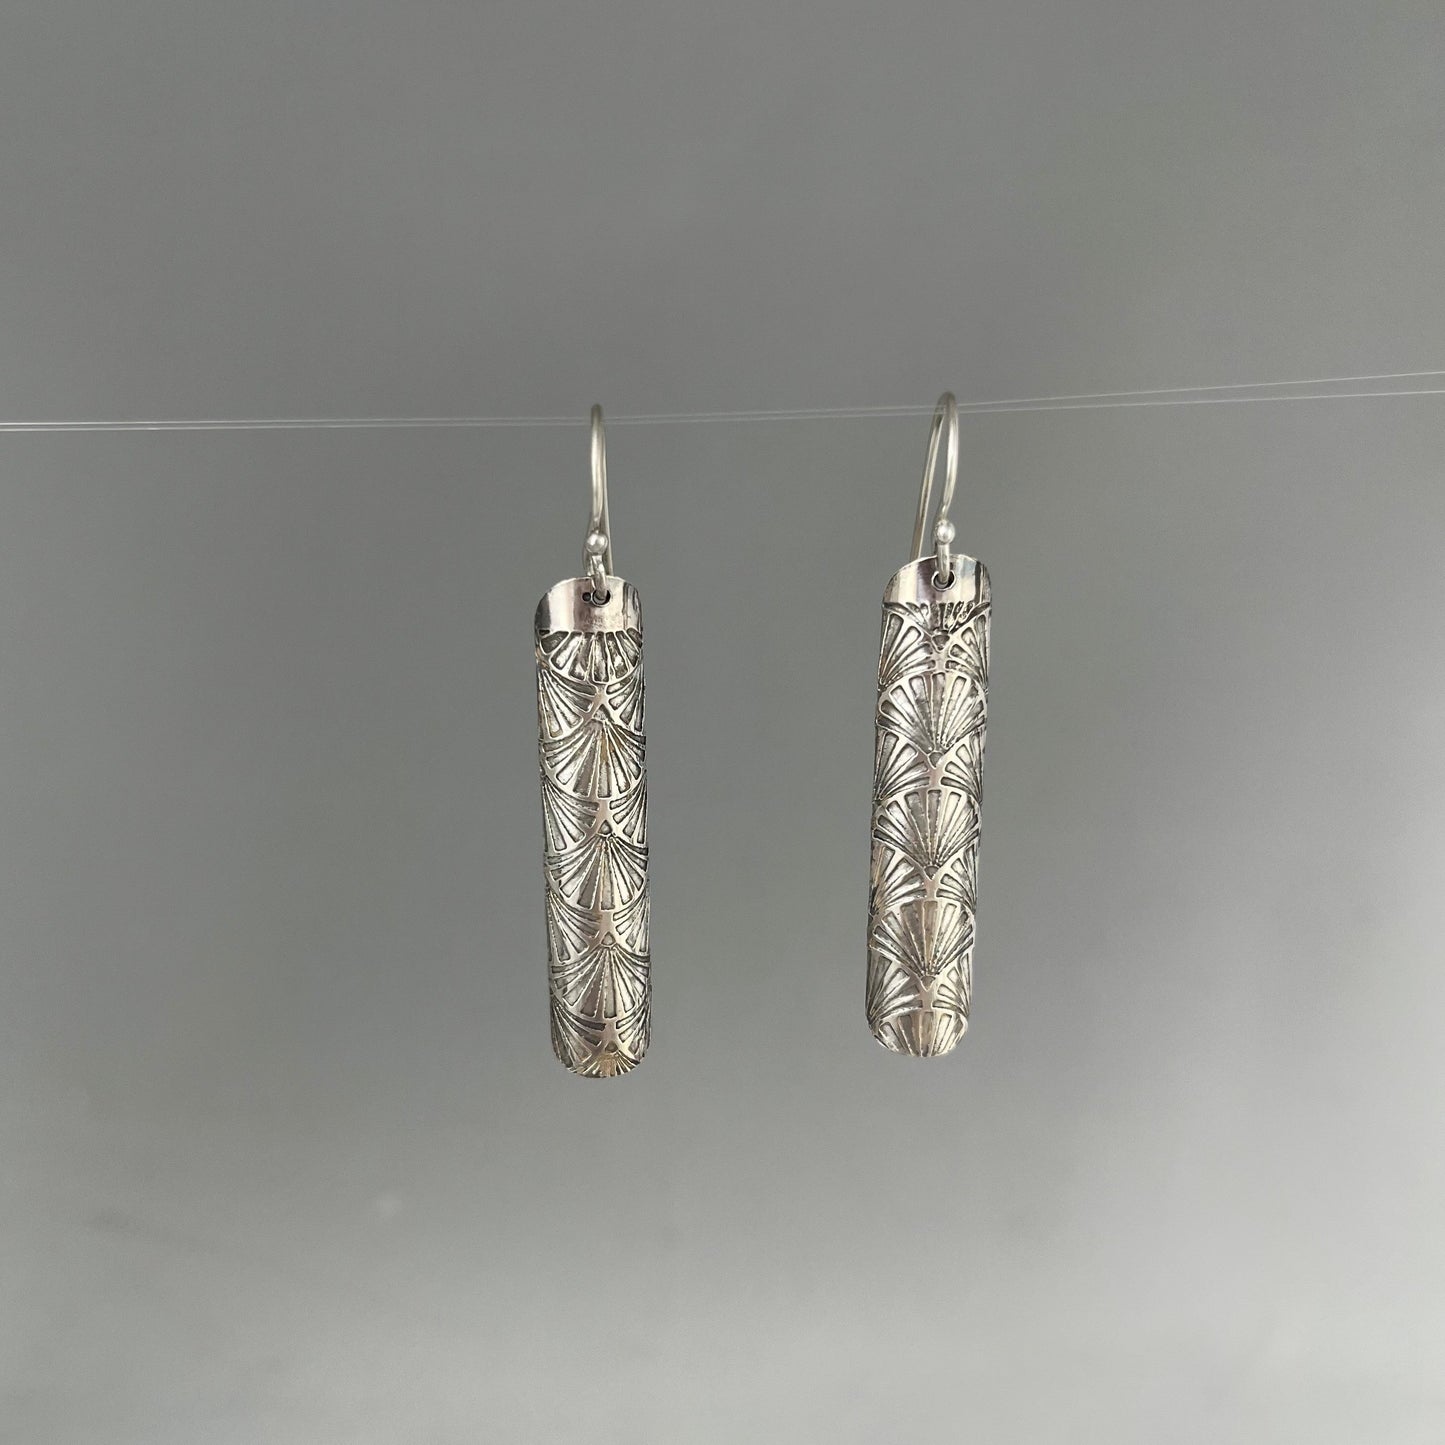 Silver Tube Earrings with Etched Motif